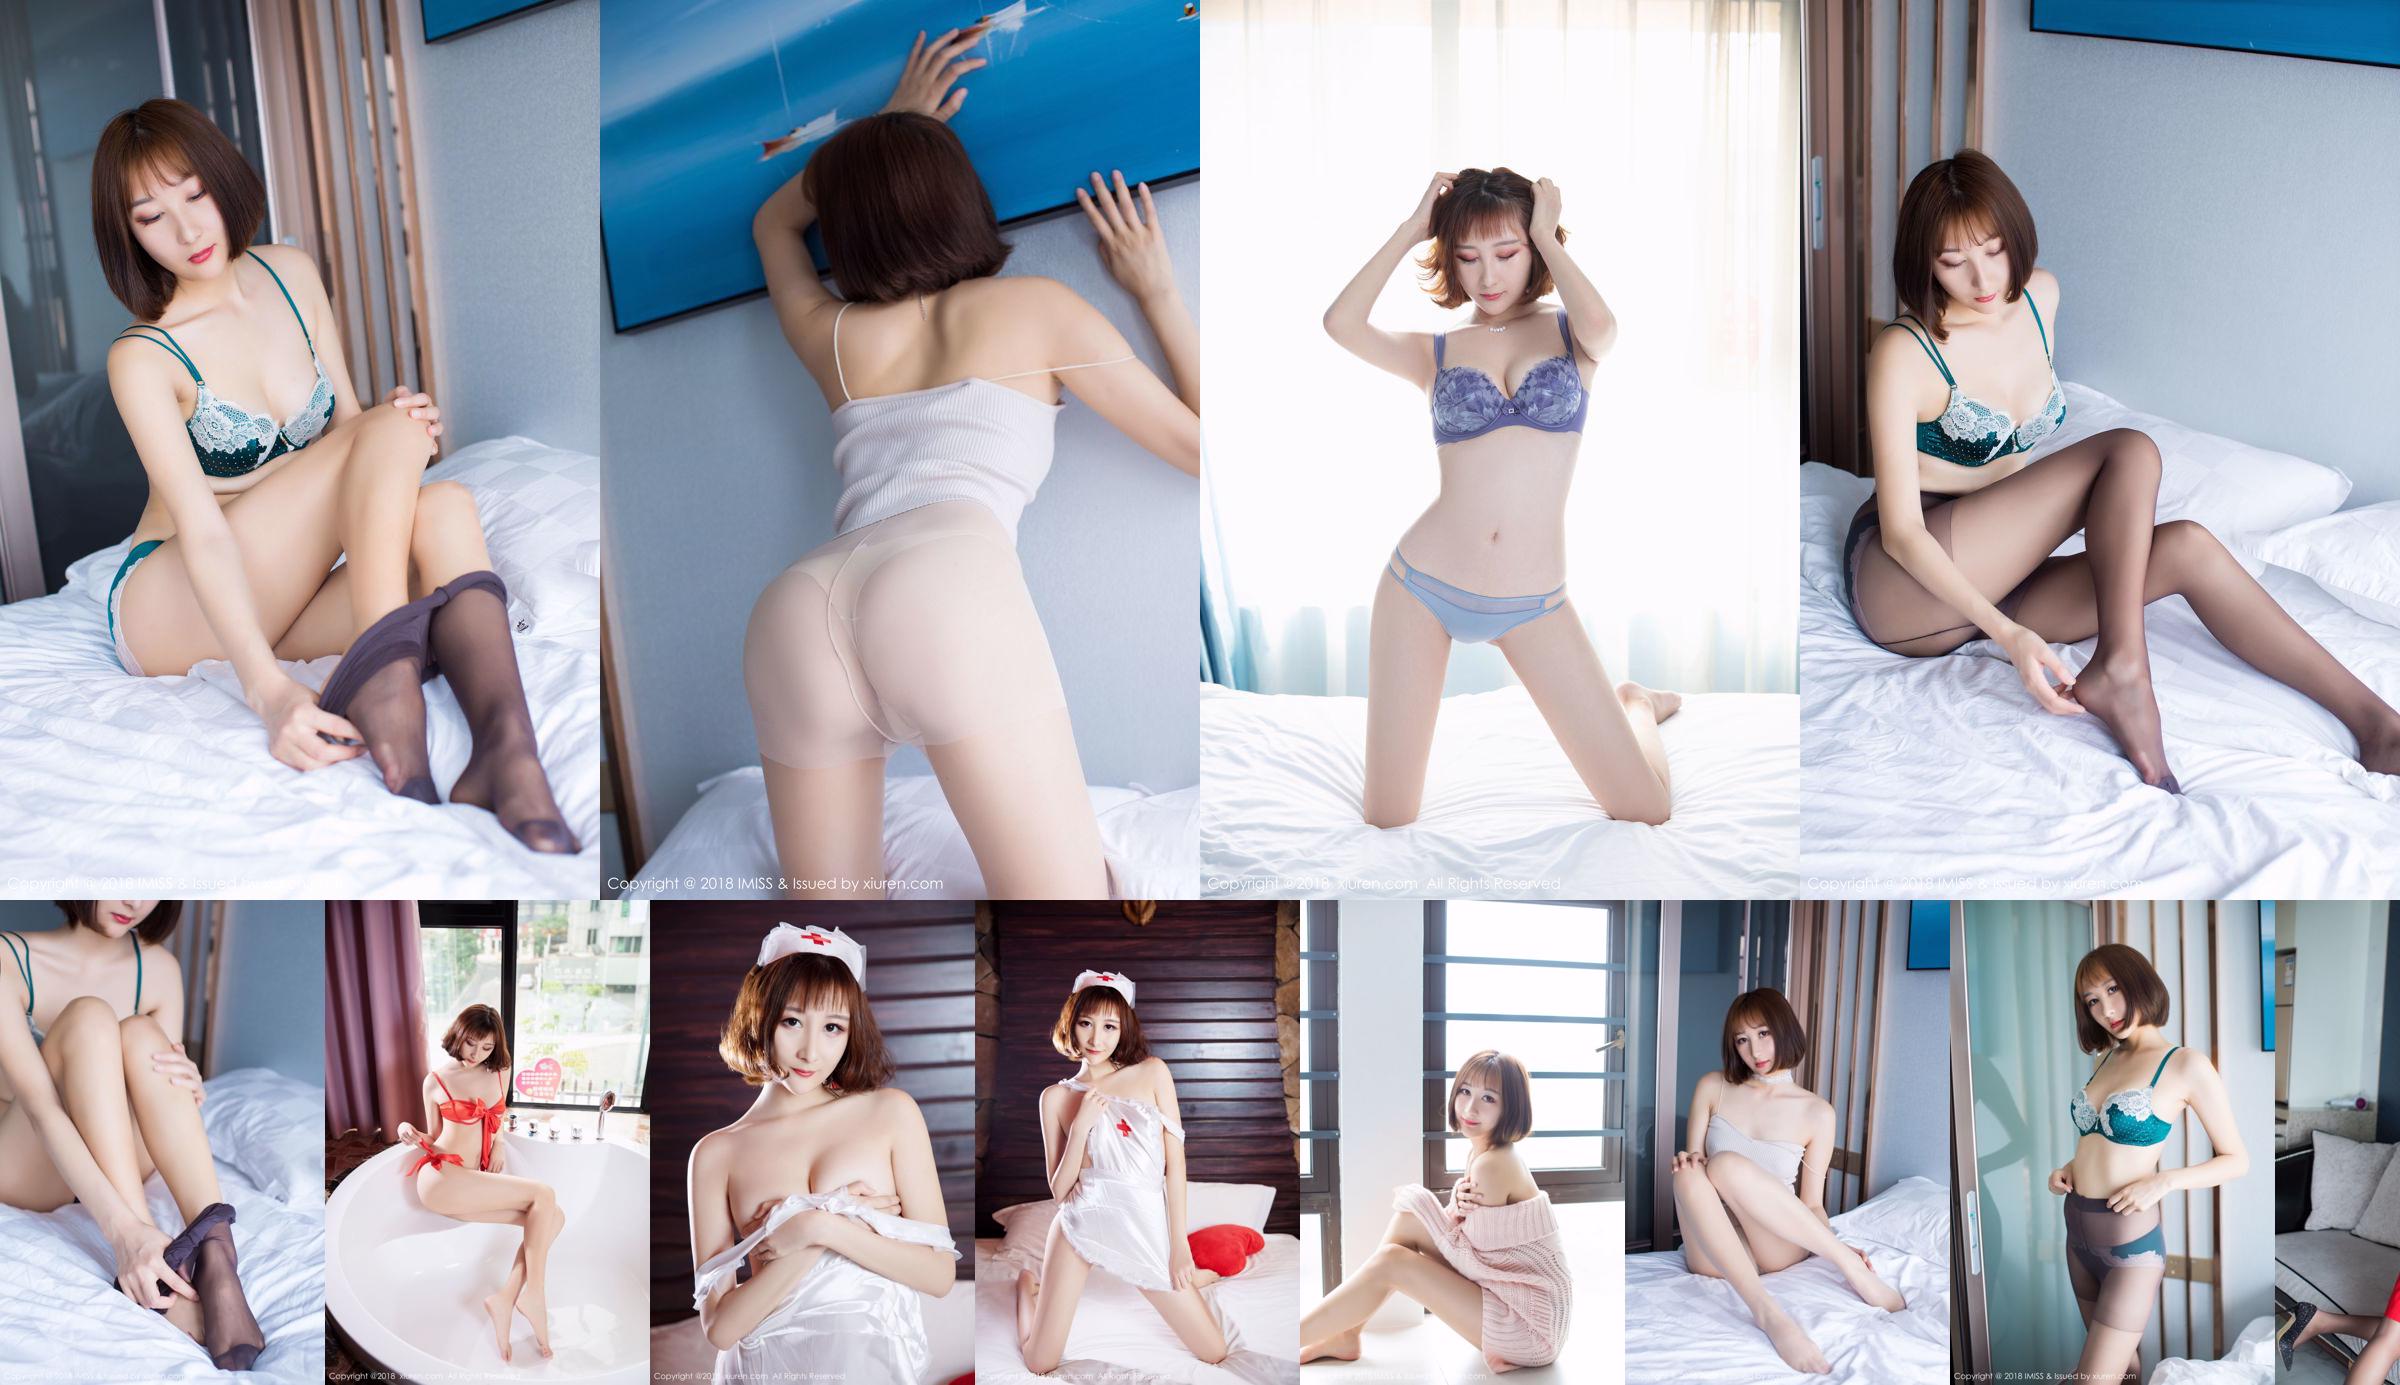 Model @九尾Ivy- "The Ultimate Private Charm" [秀人XIUREN] No.1046 No.1469a8 Page 3